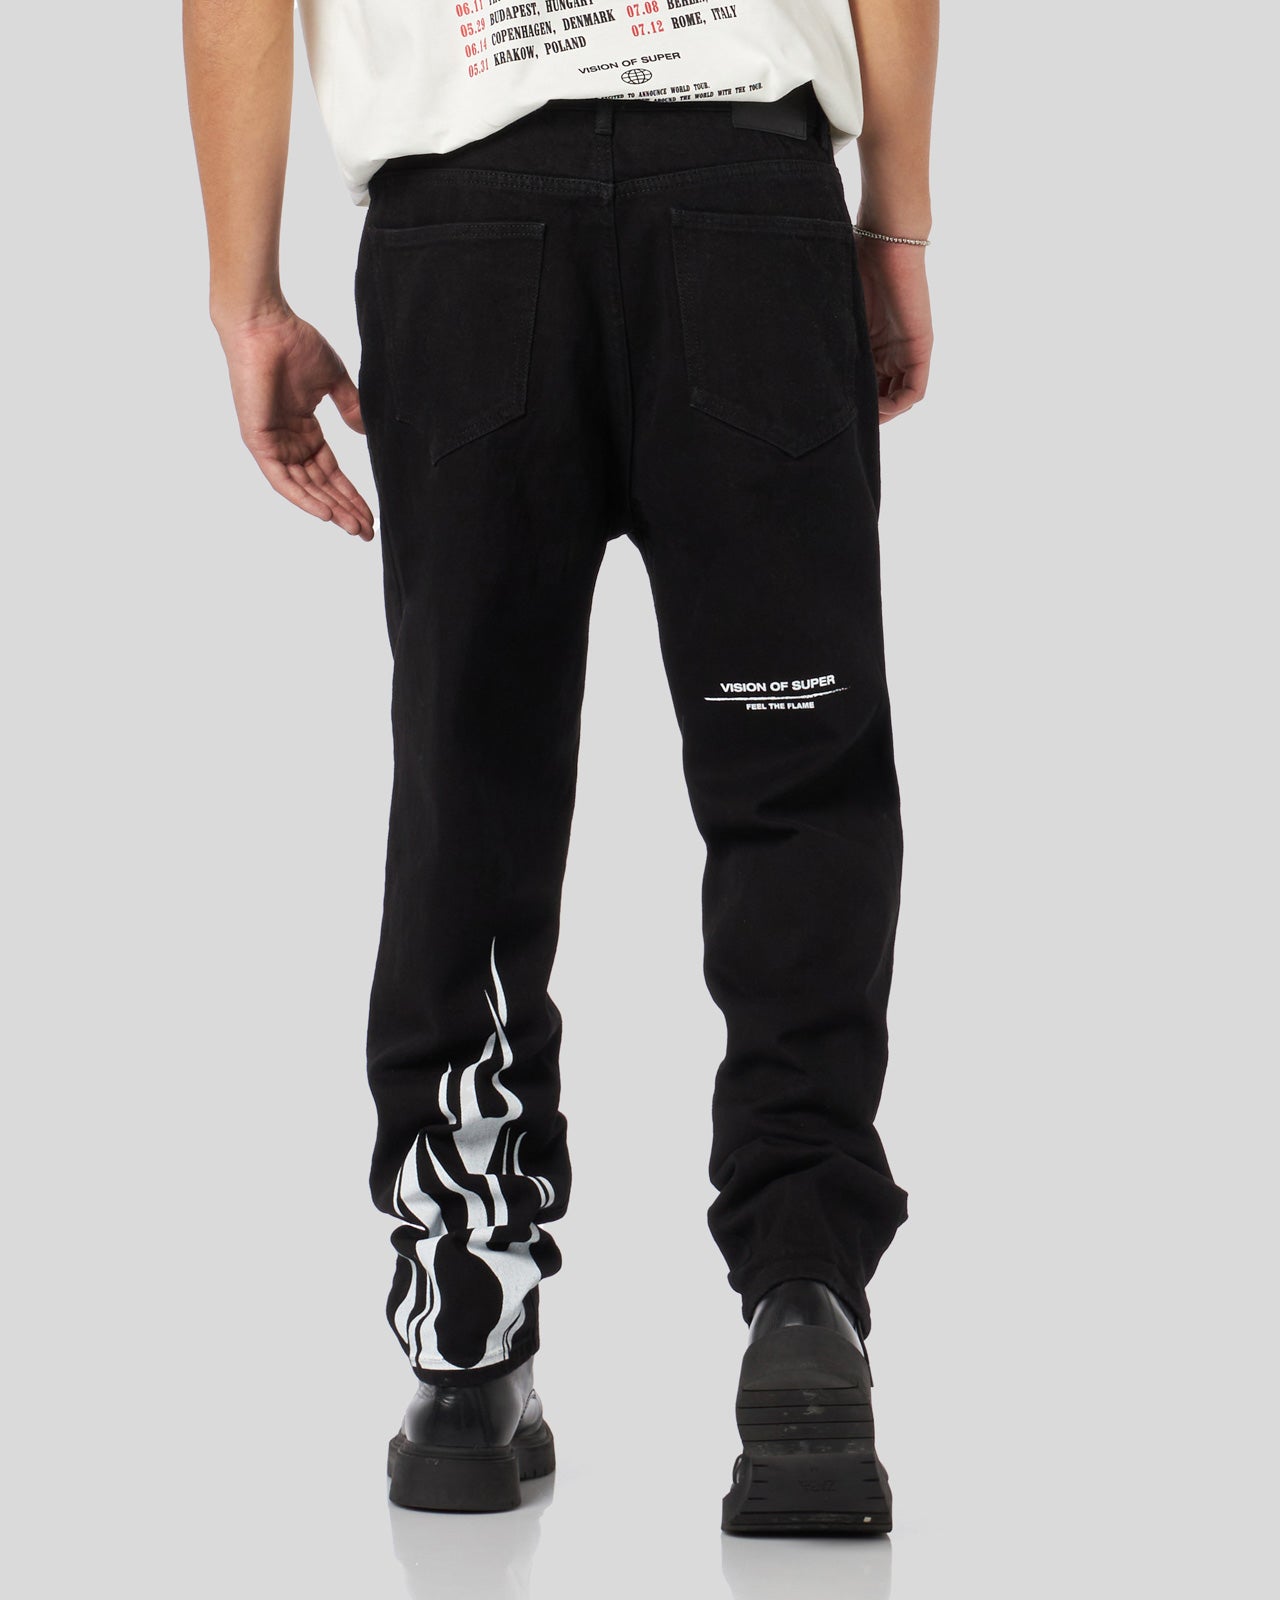 BLACK DENIM JEANS WITH PRINTED FLAMES AND LOGO